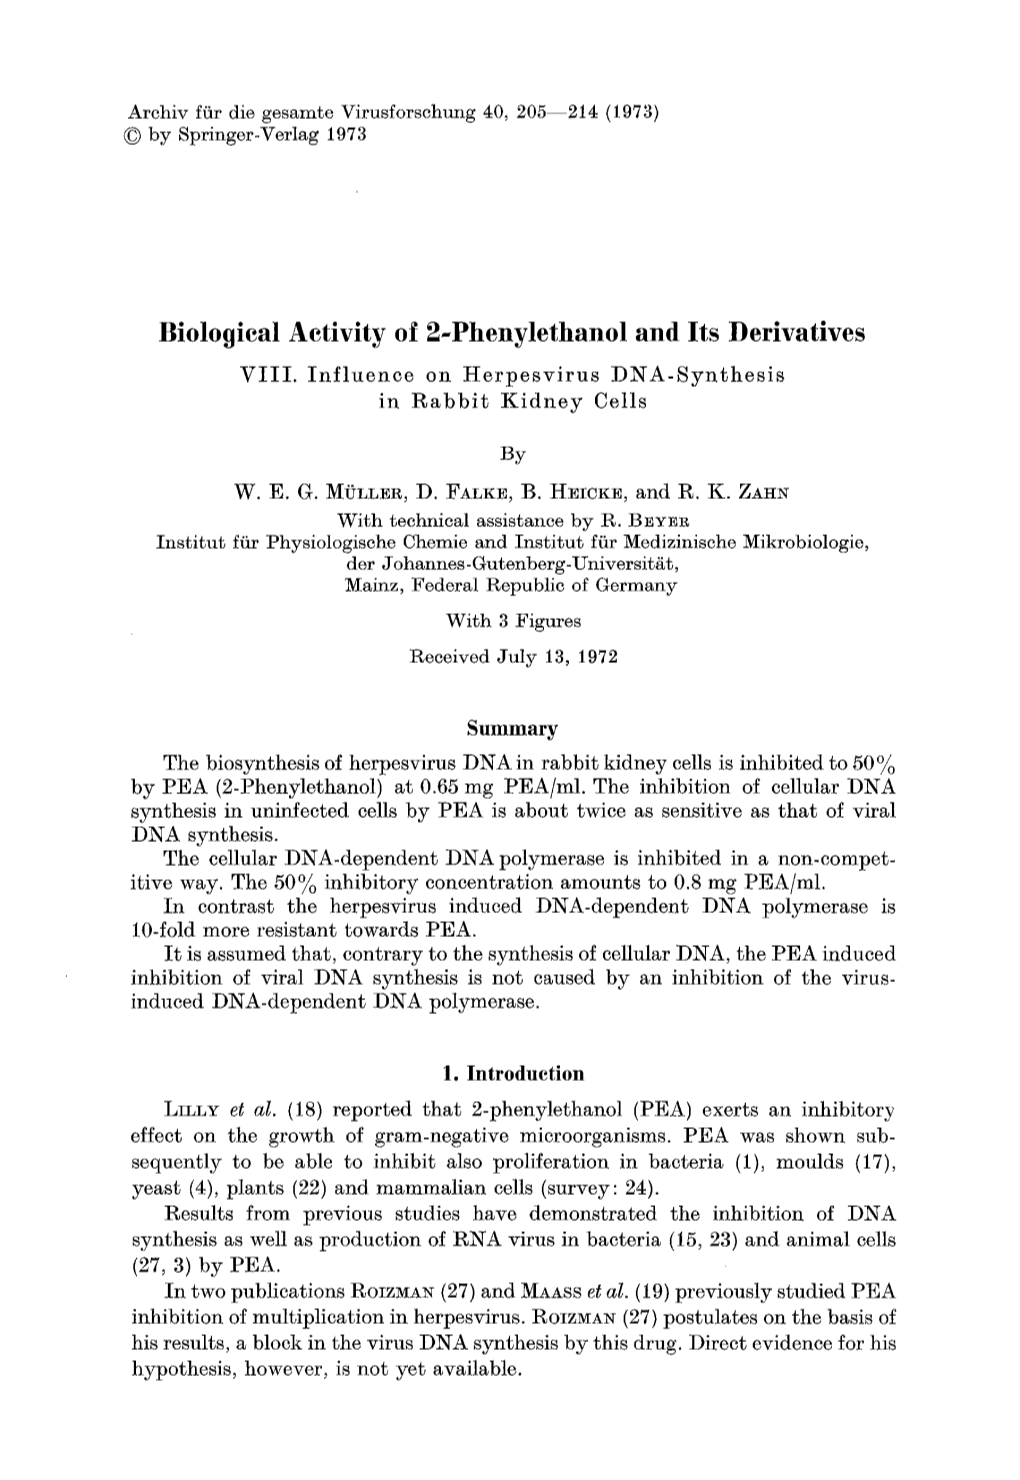 Biological Activity of 2-Phenylethanol and Its Derivatives